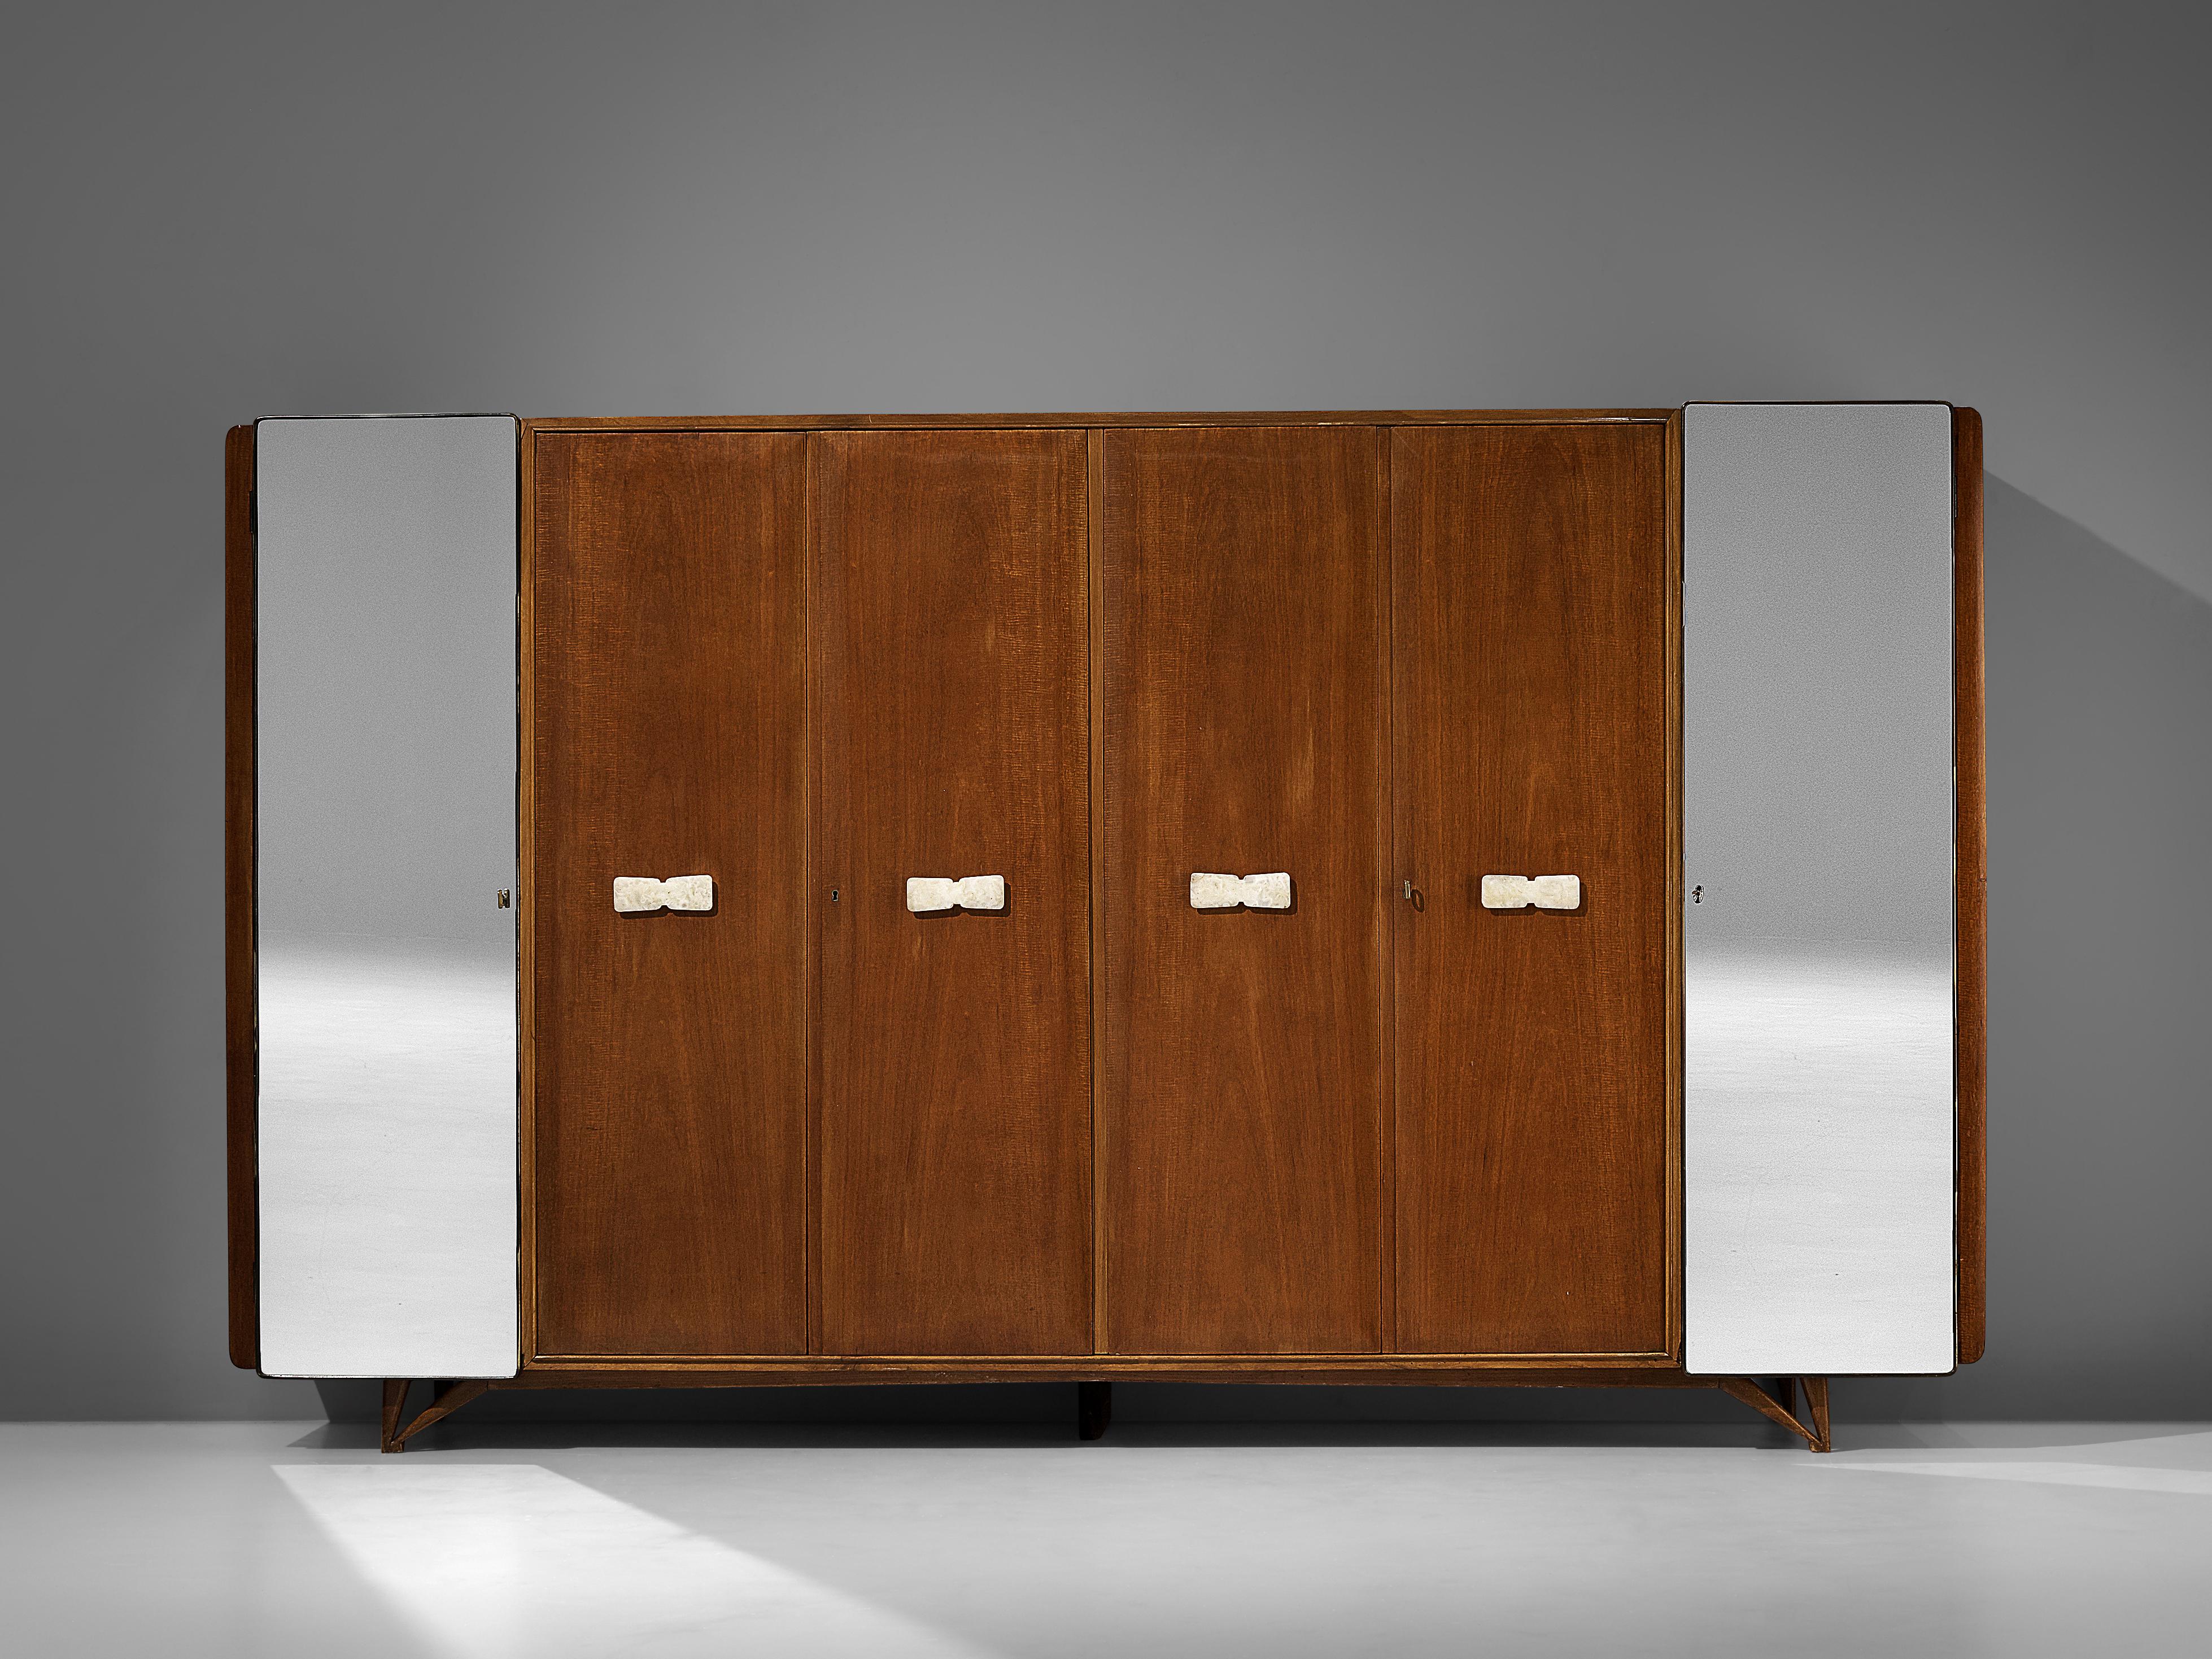 Wardrobe, curly mahogany, maple, mirrored glass, brass, alabaster, Italy, 1960s

With its six doors this Italian armoire has an impressive size. Two mirrored doors flank the sides, while the four inner doors showcase luxurious mahogany veneer. The